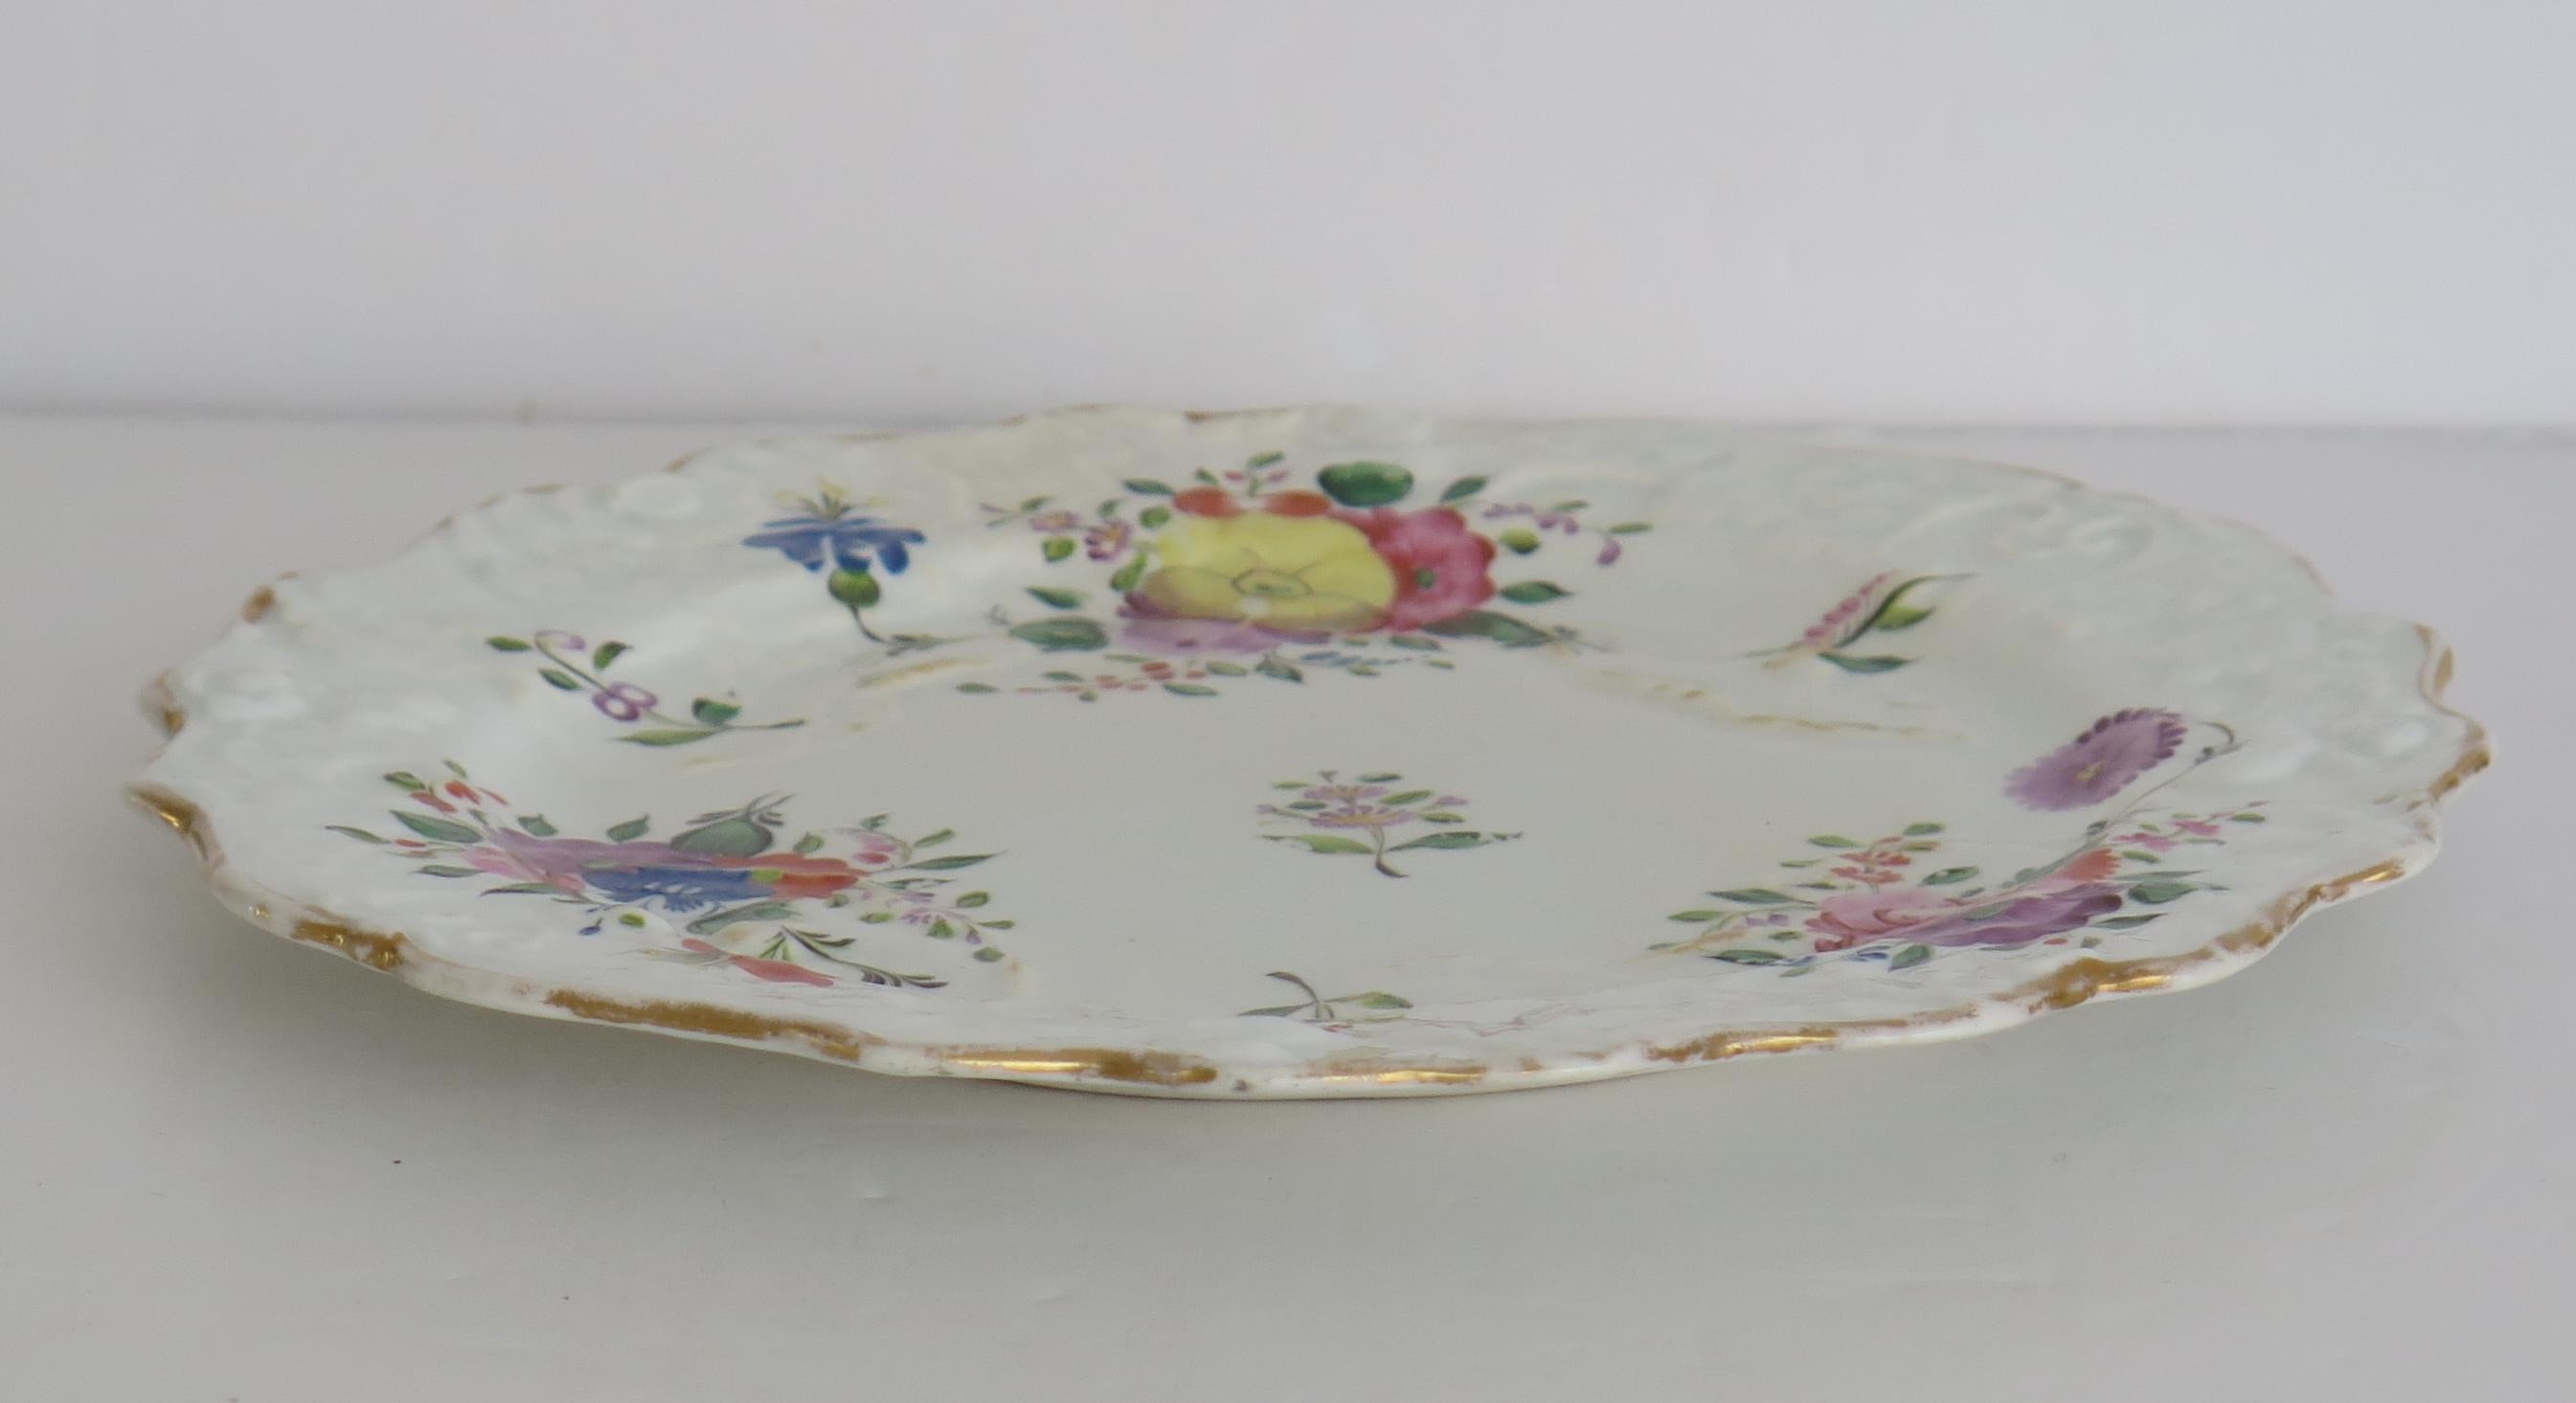 Mason's Porcelain Plate Hand Painted in Central Spray Mixed Border Ptn, Ca 1815 For Sale 1